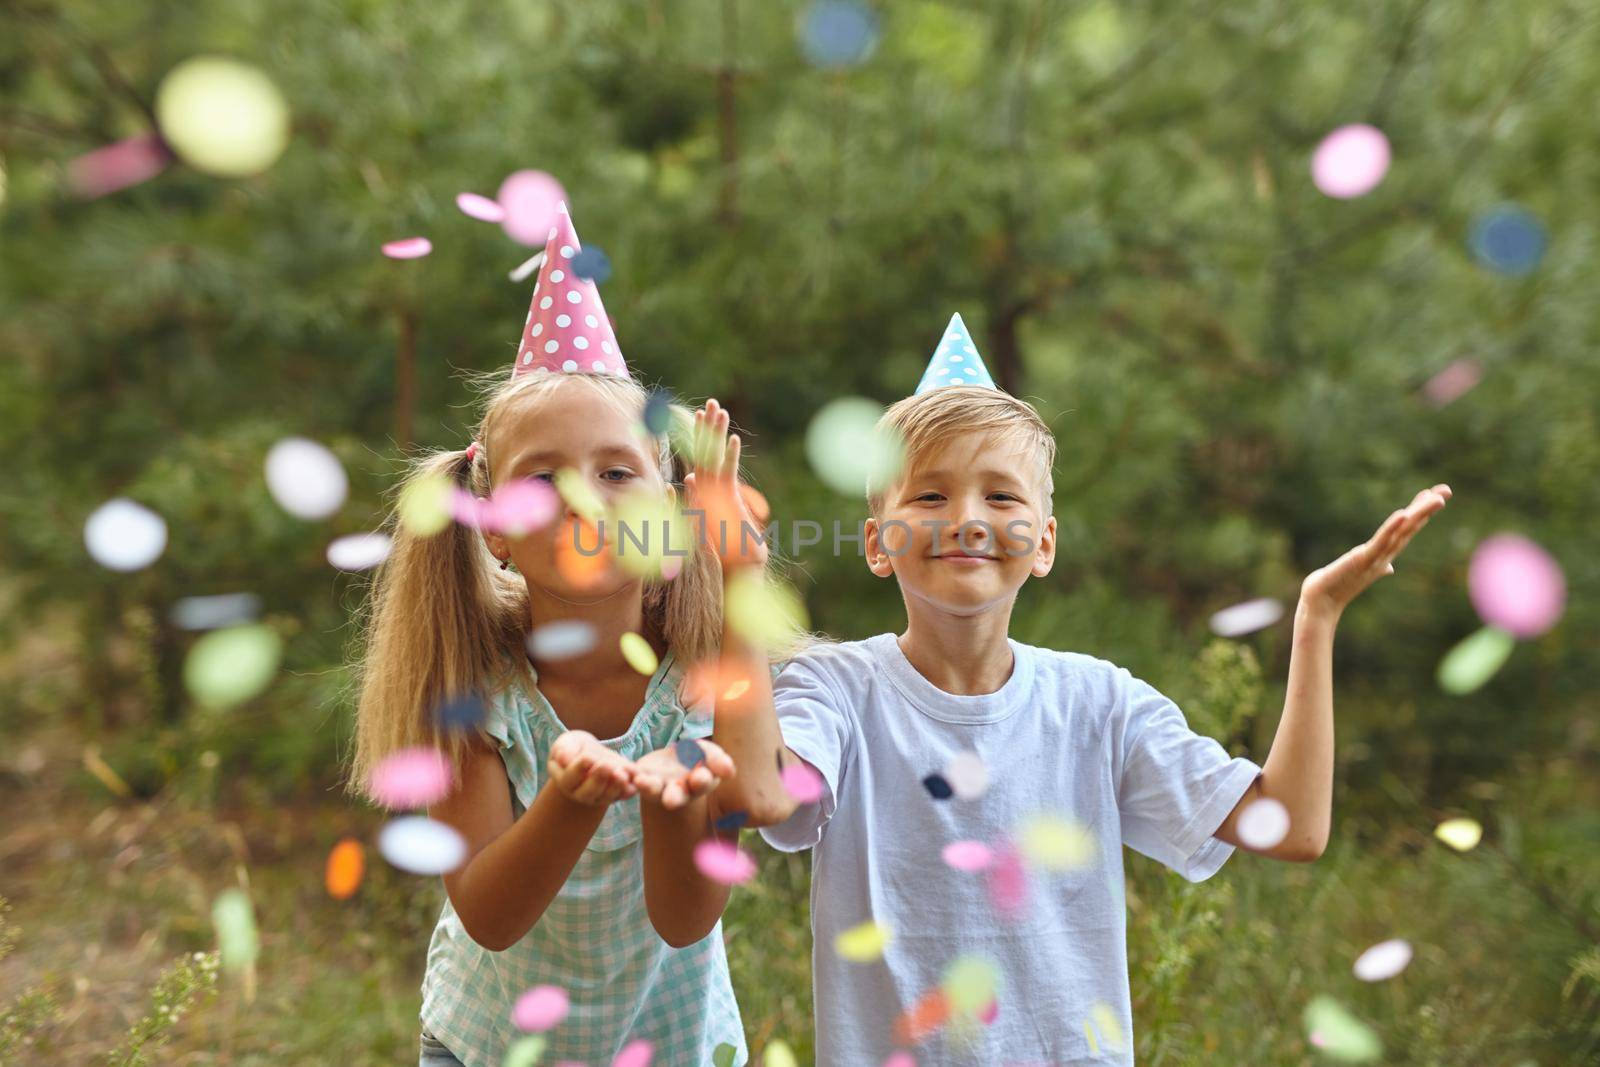 Little Girl and boy having fun celebrating Birthday while blowing confetti at party outdoor - Selective Focus